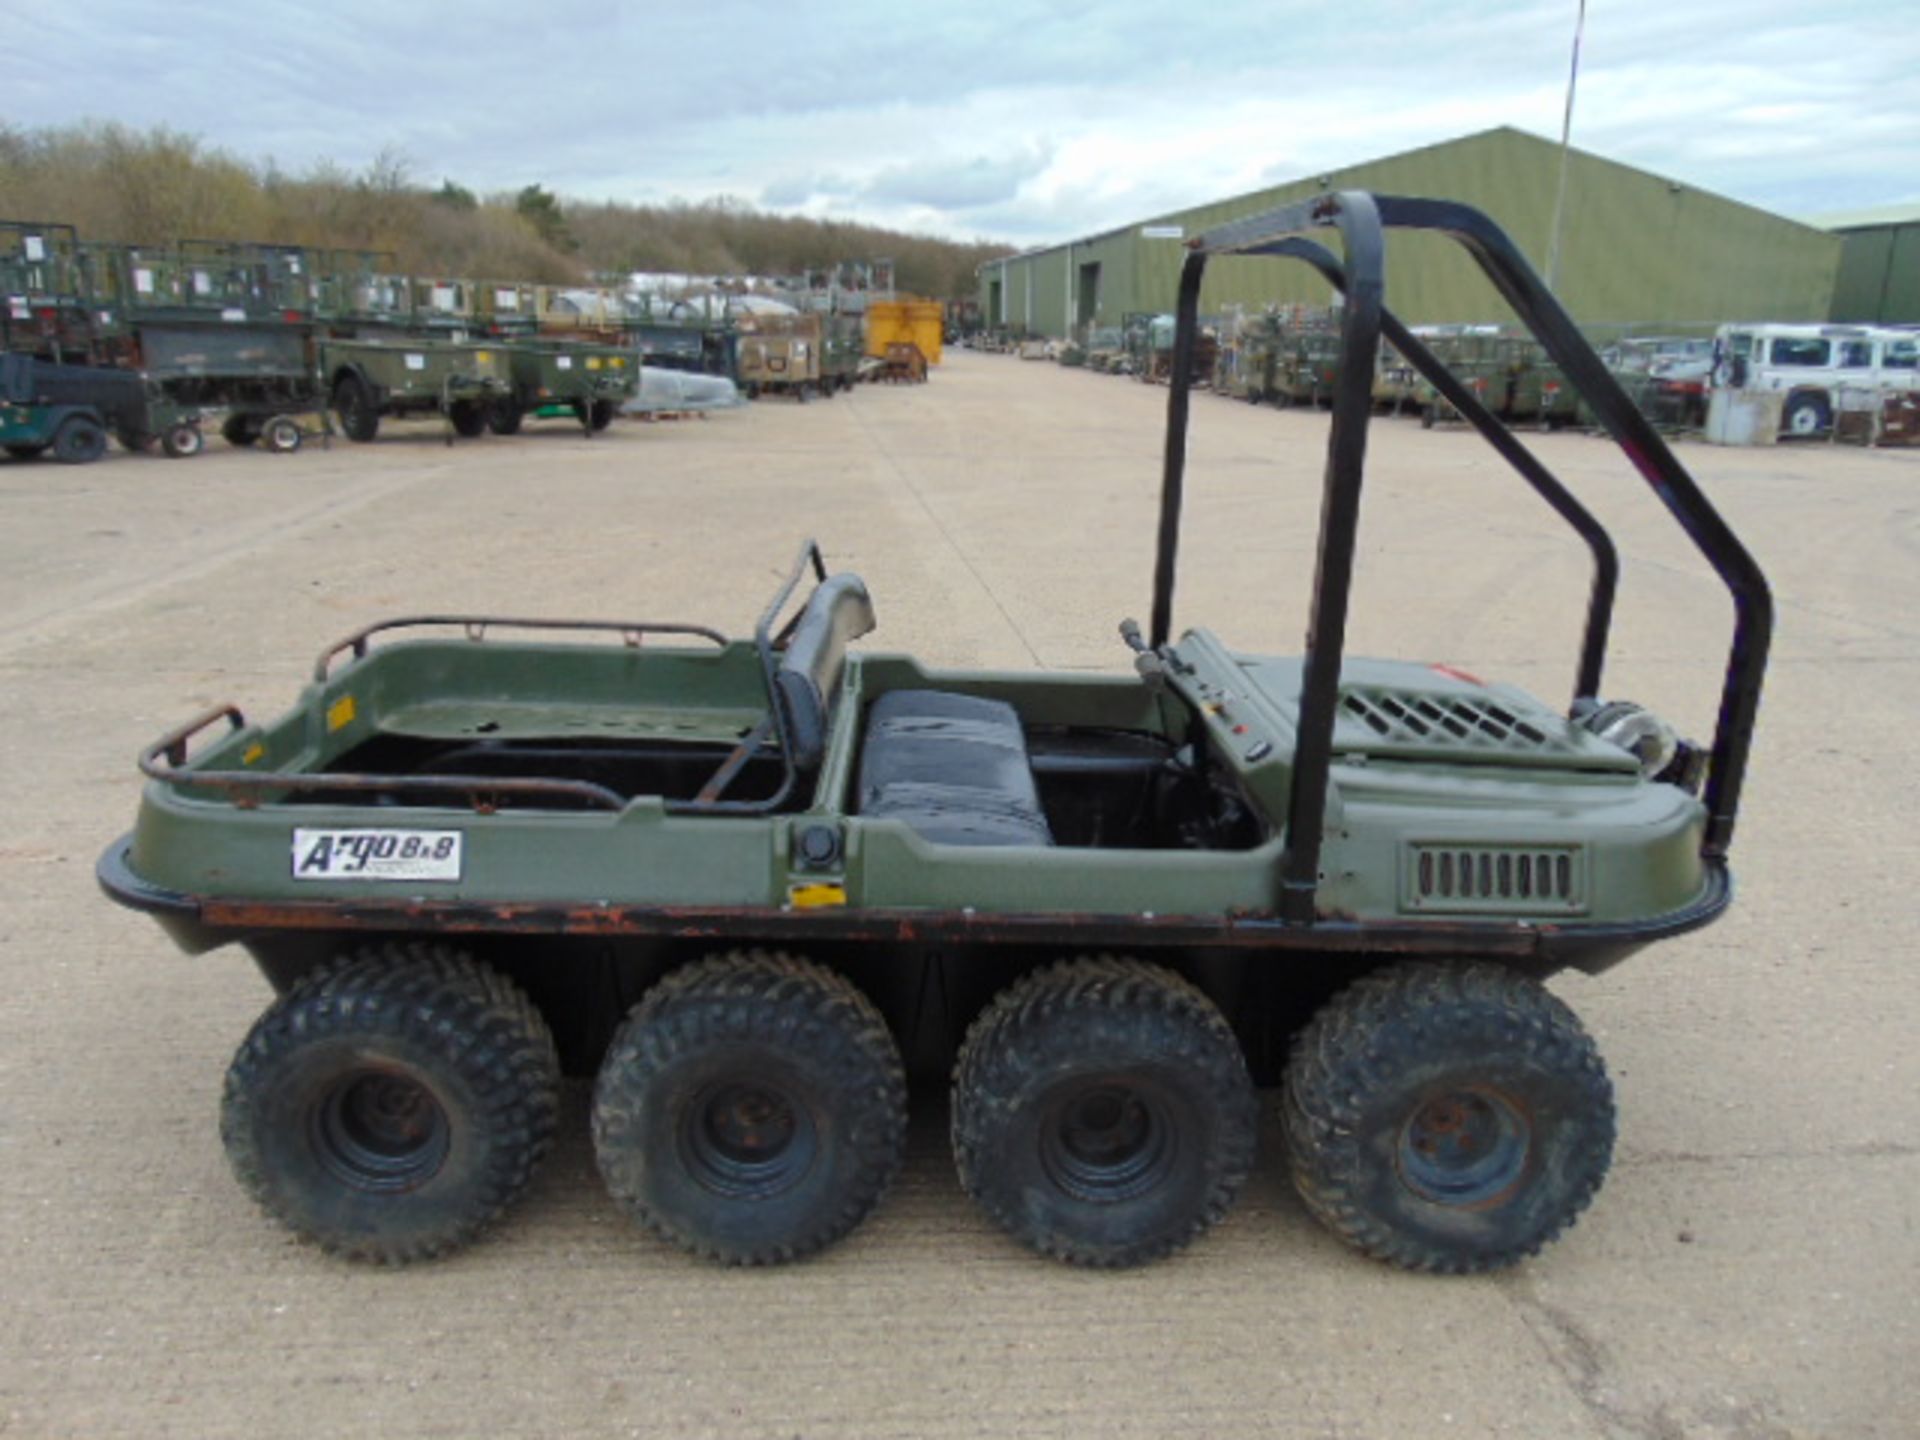 Argocat 8x8 Response Amphibious ATV with Front Mounted Winch - Image 8 of 28